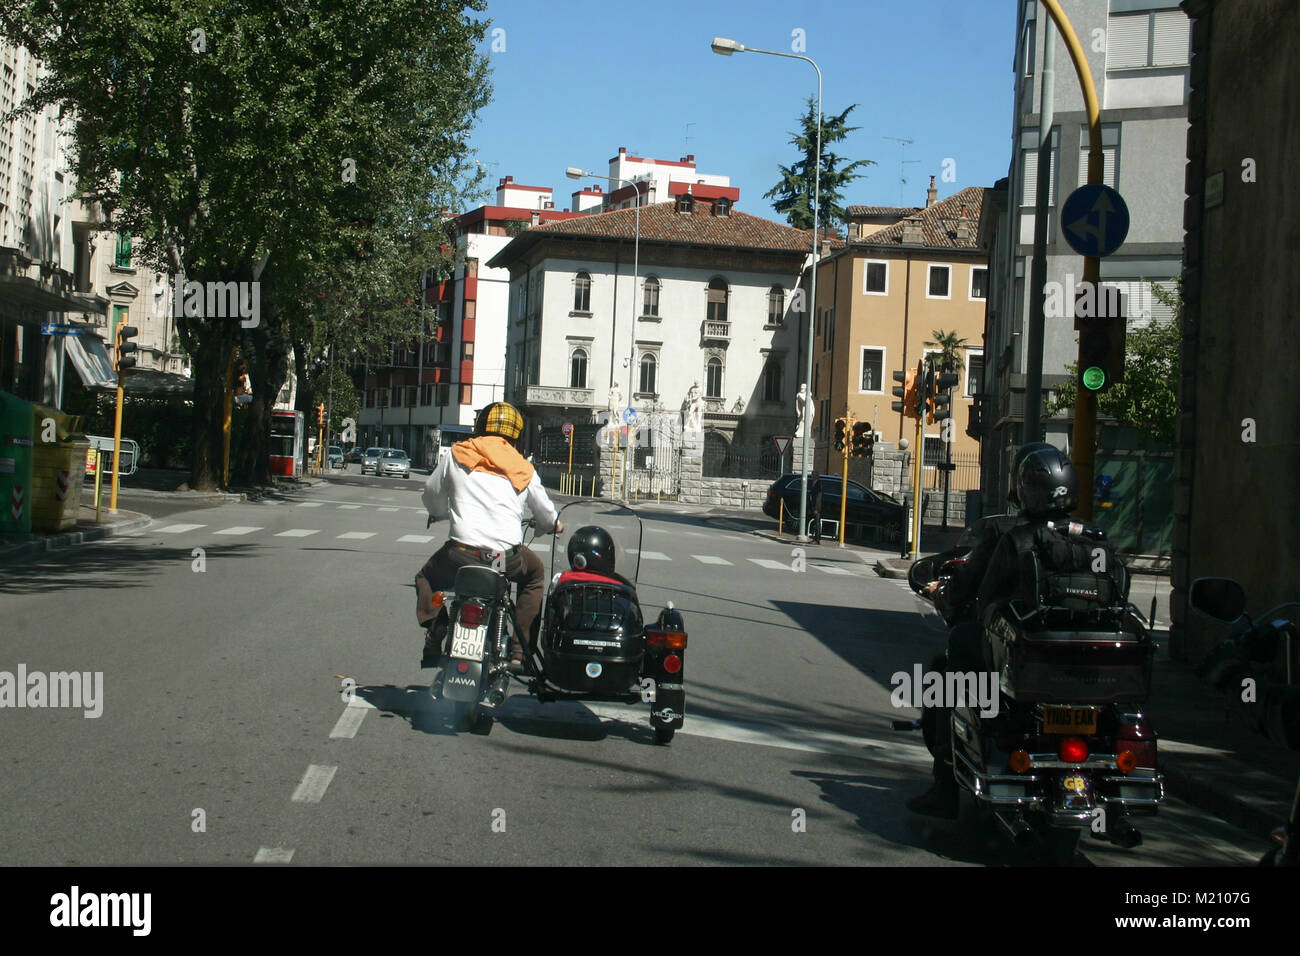 Motorcycle with sidecar on the roads of Udine, Italy Stock Photo